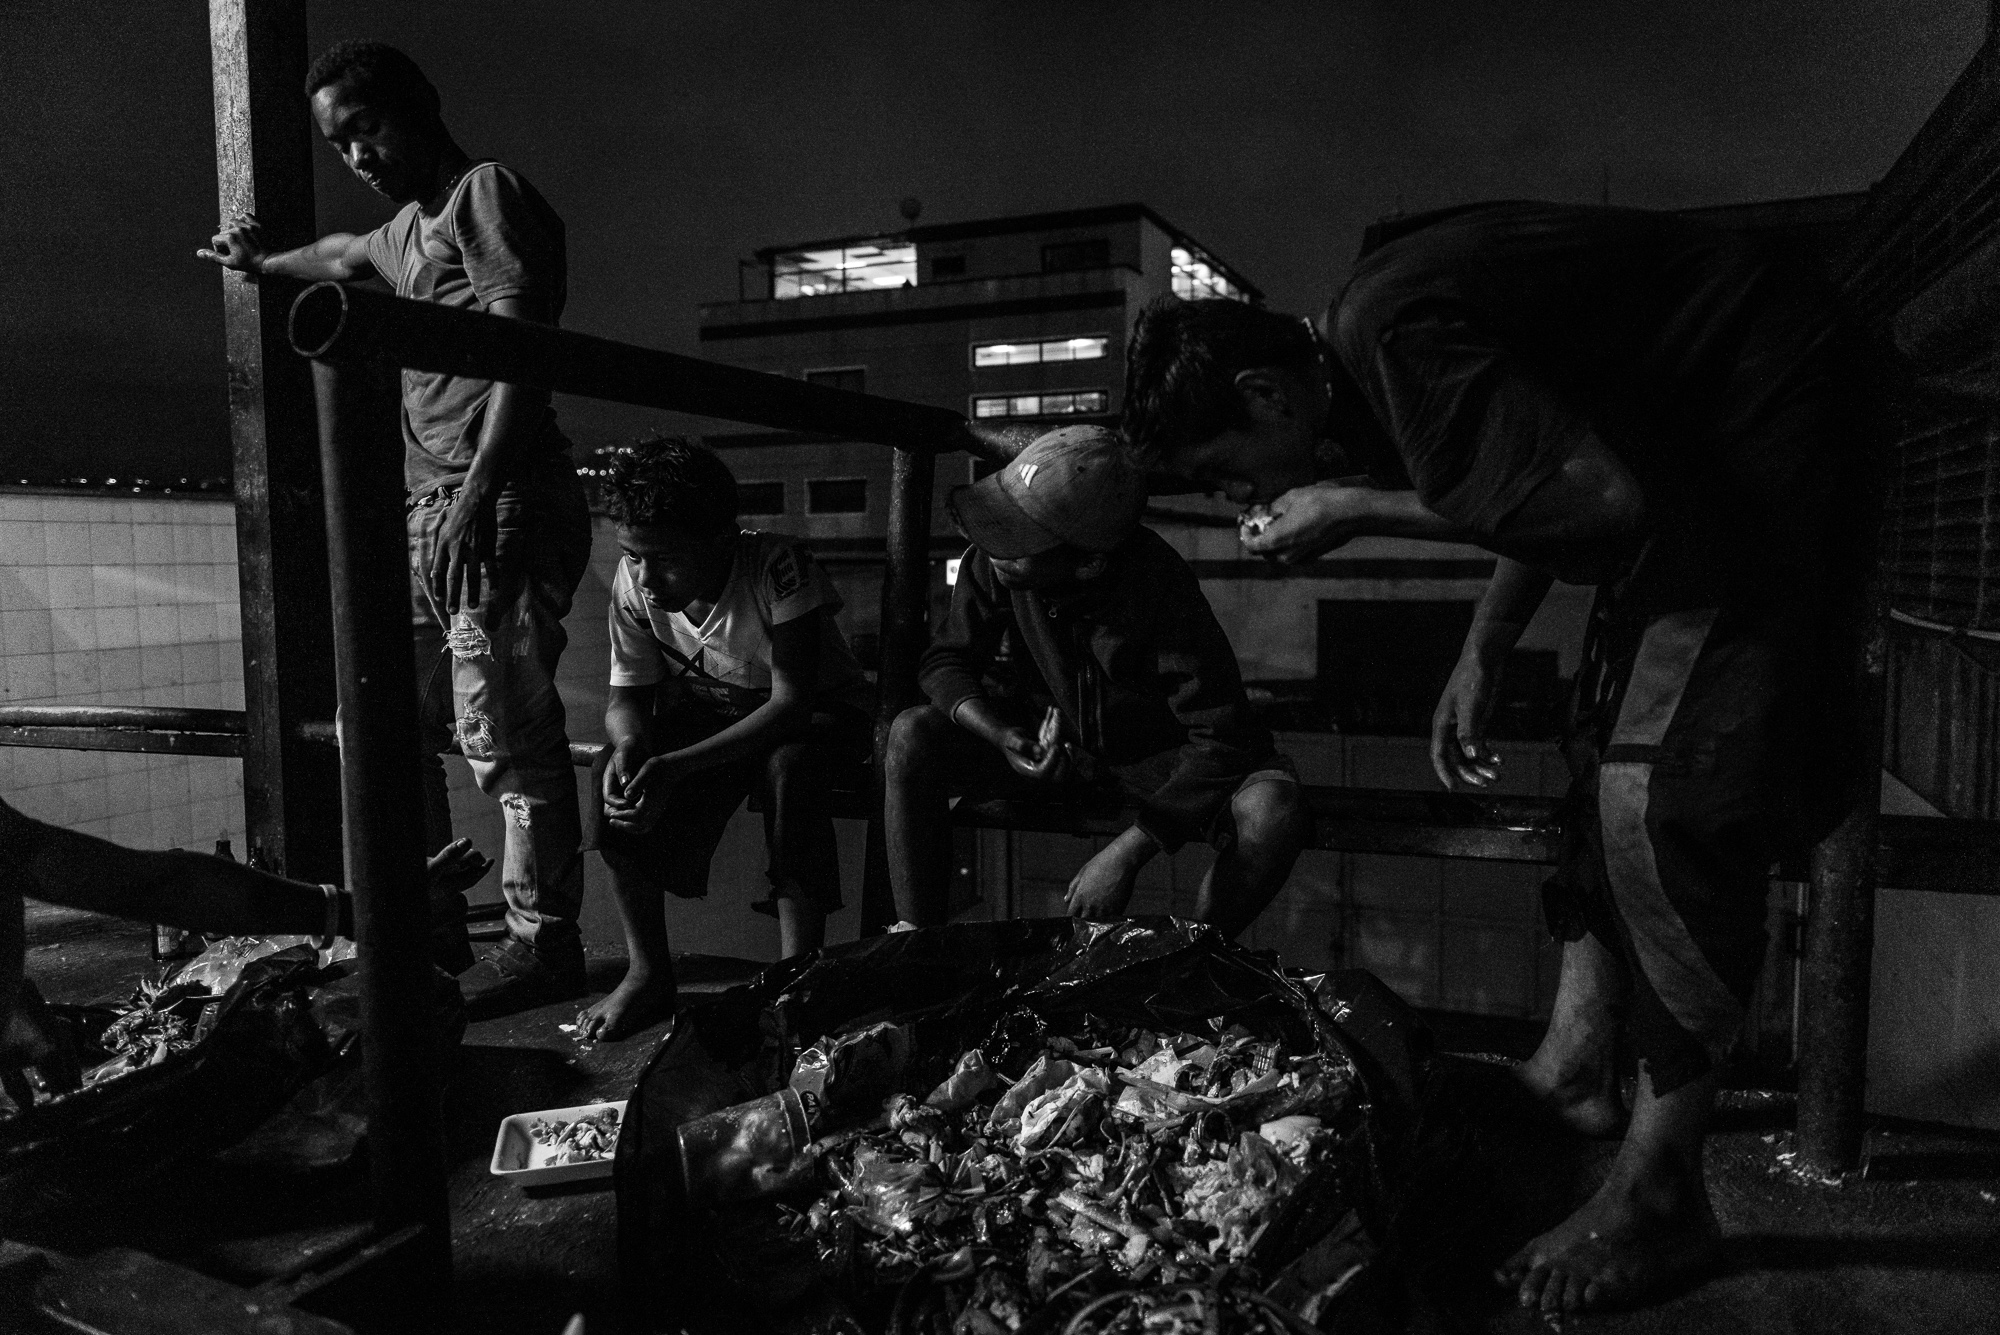 Children scavenge for food in the back alley of a large shopping center. (Ignacio Marin)